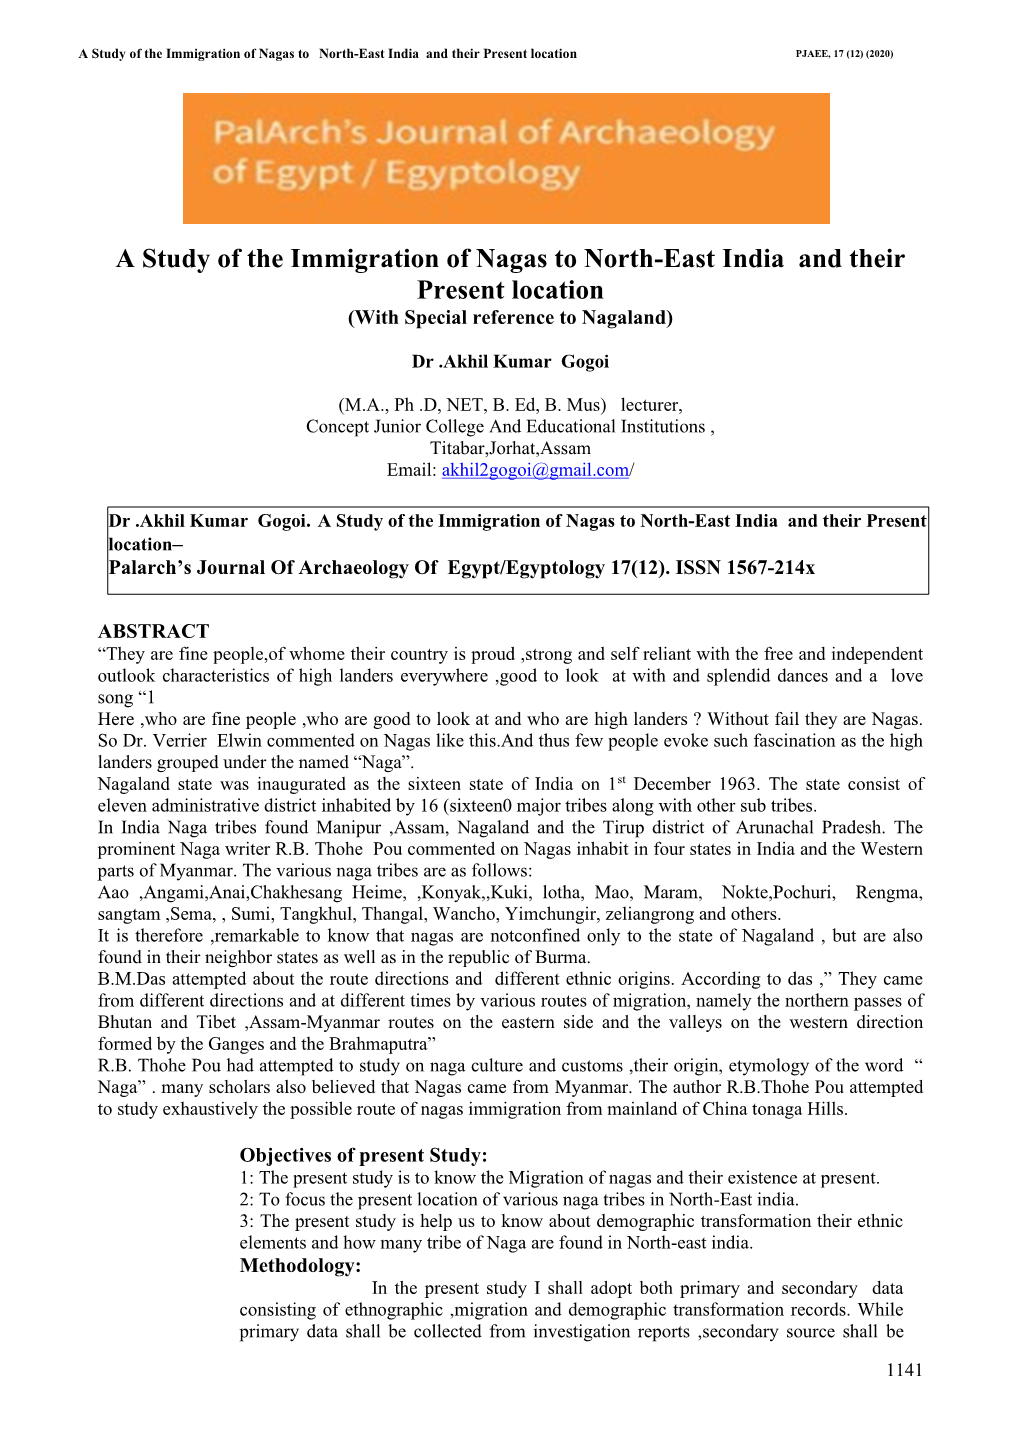 A Study of the Immigration of Nagas to North-East India and Their Present Location PJAEE, 17 (12) (2020)